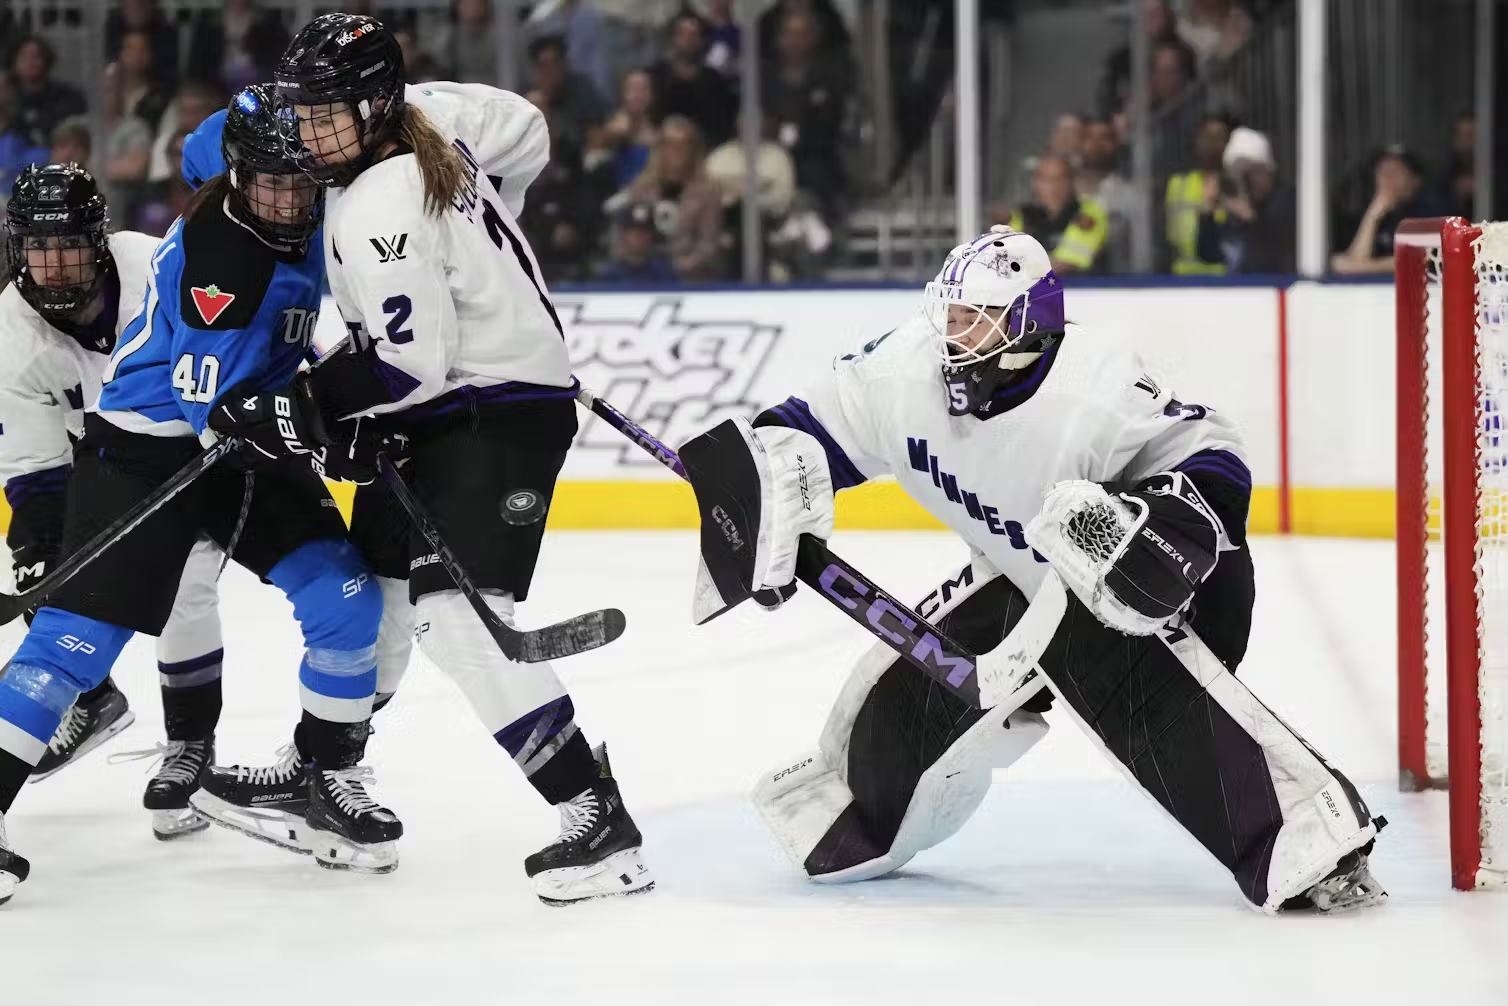 A hockey goalie crouches with their stick out as two other hockey players fight over a puck beside them.